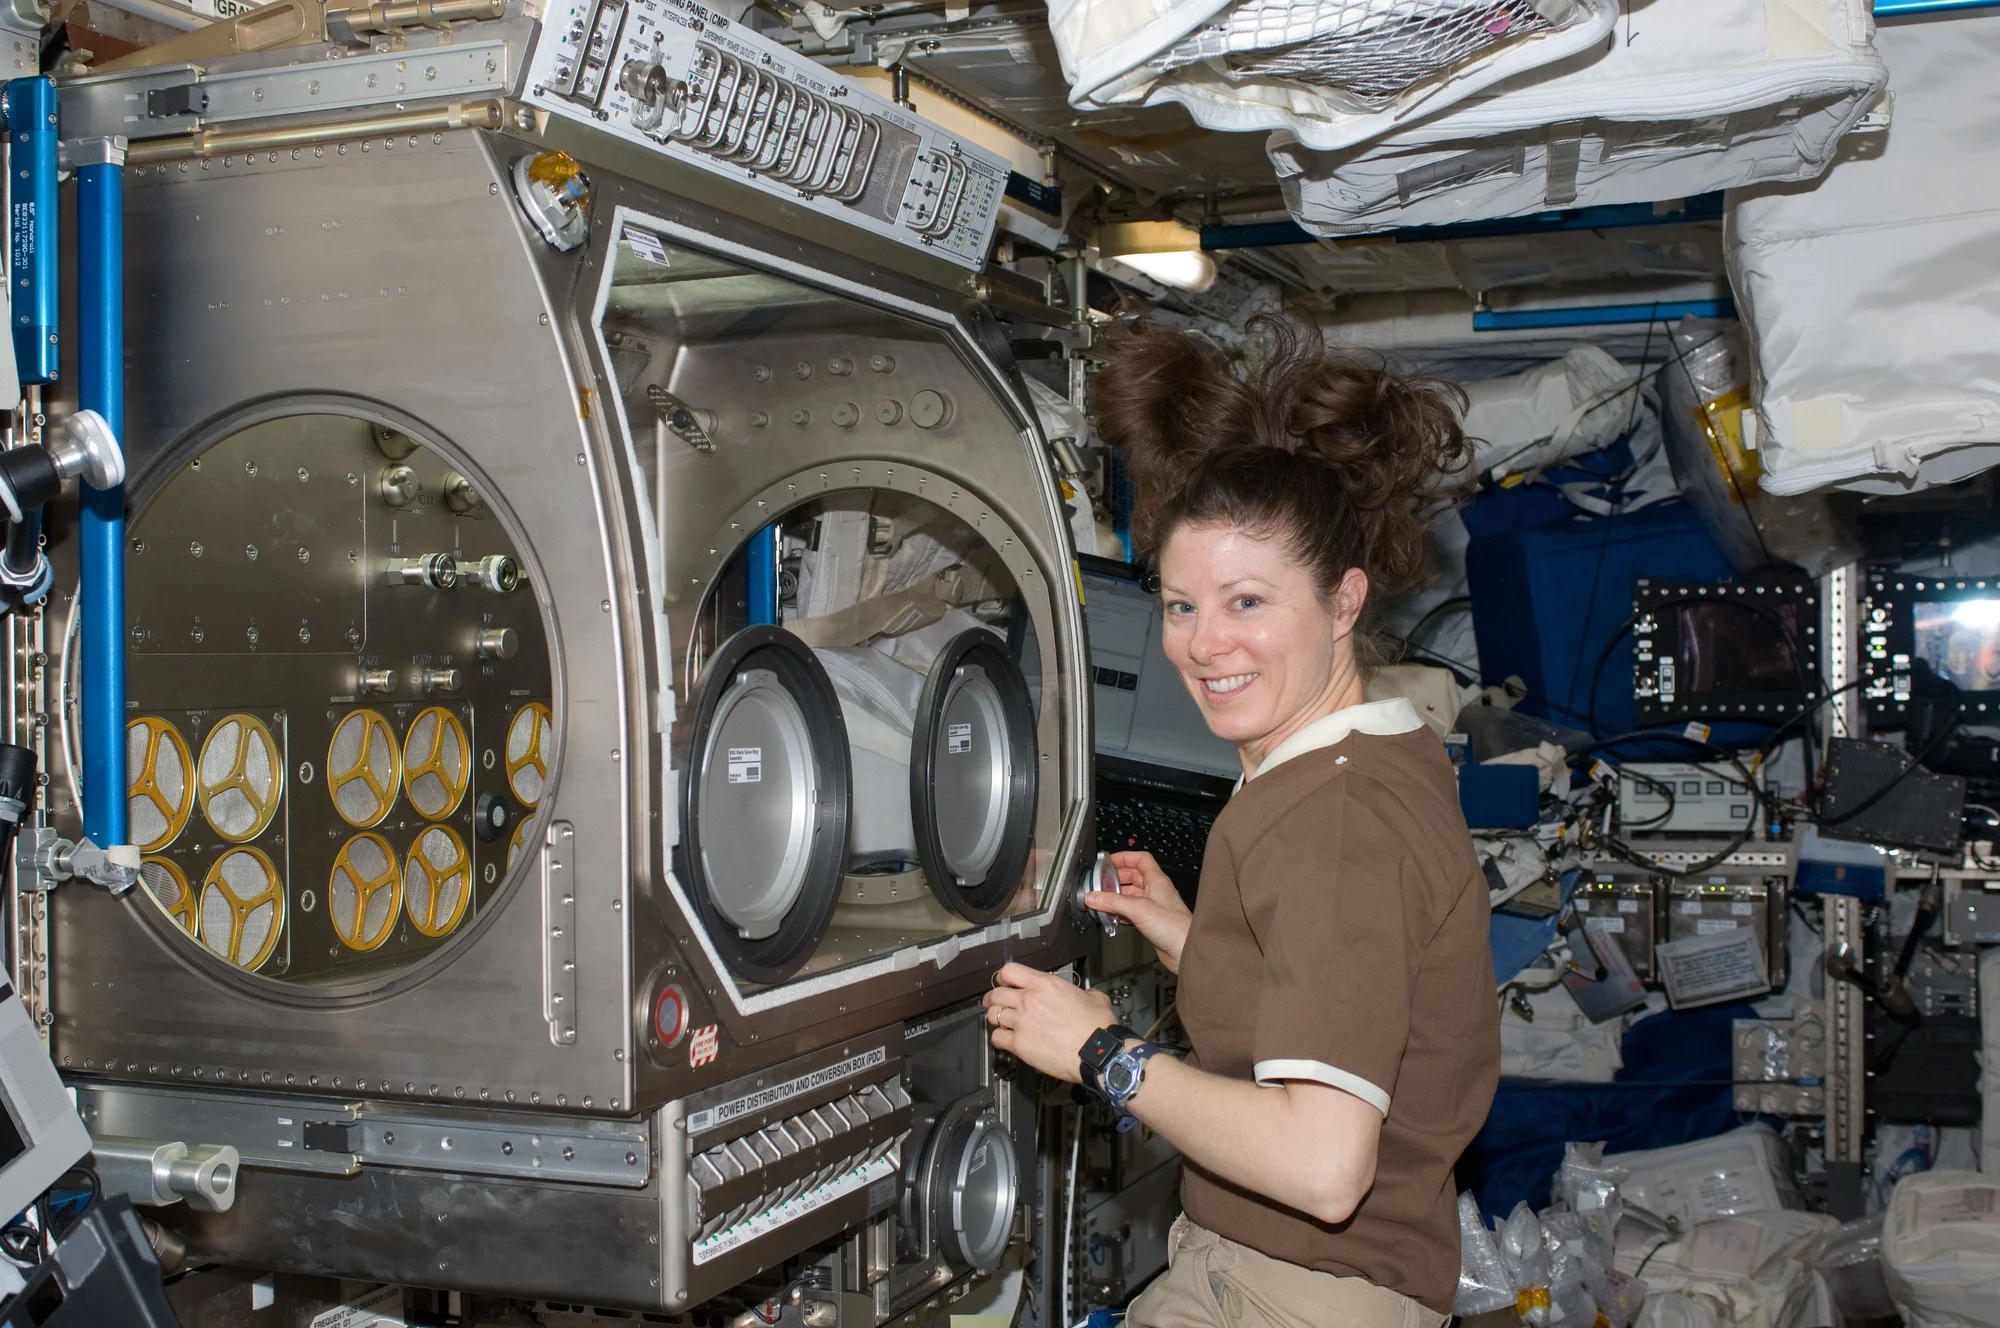 NASA astronaut Tracy Caldwell Dyson, Expedition 23 flight engineer, works with experiment hardware in the Microgravity Science Glovebox (MSG) located in the Columbus laboratory of the International Space Station.